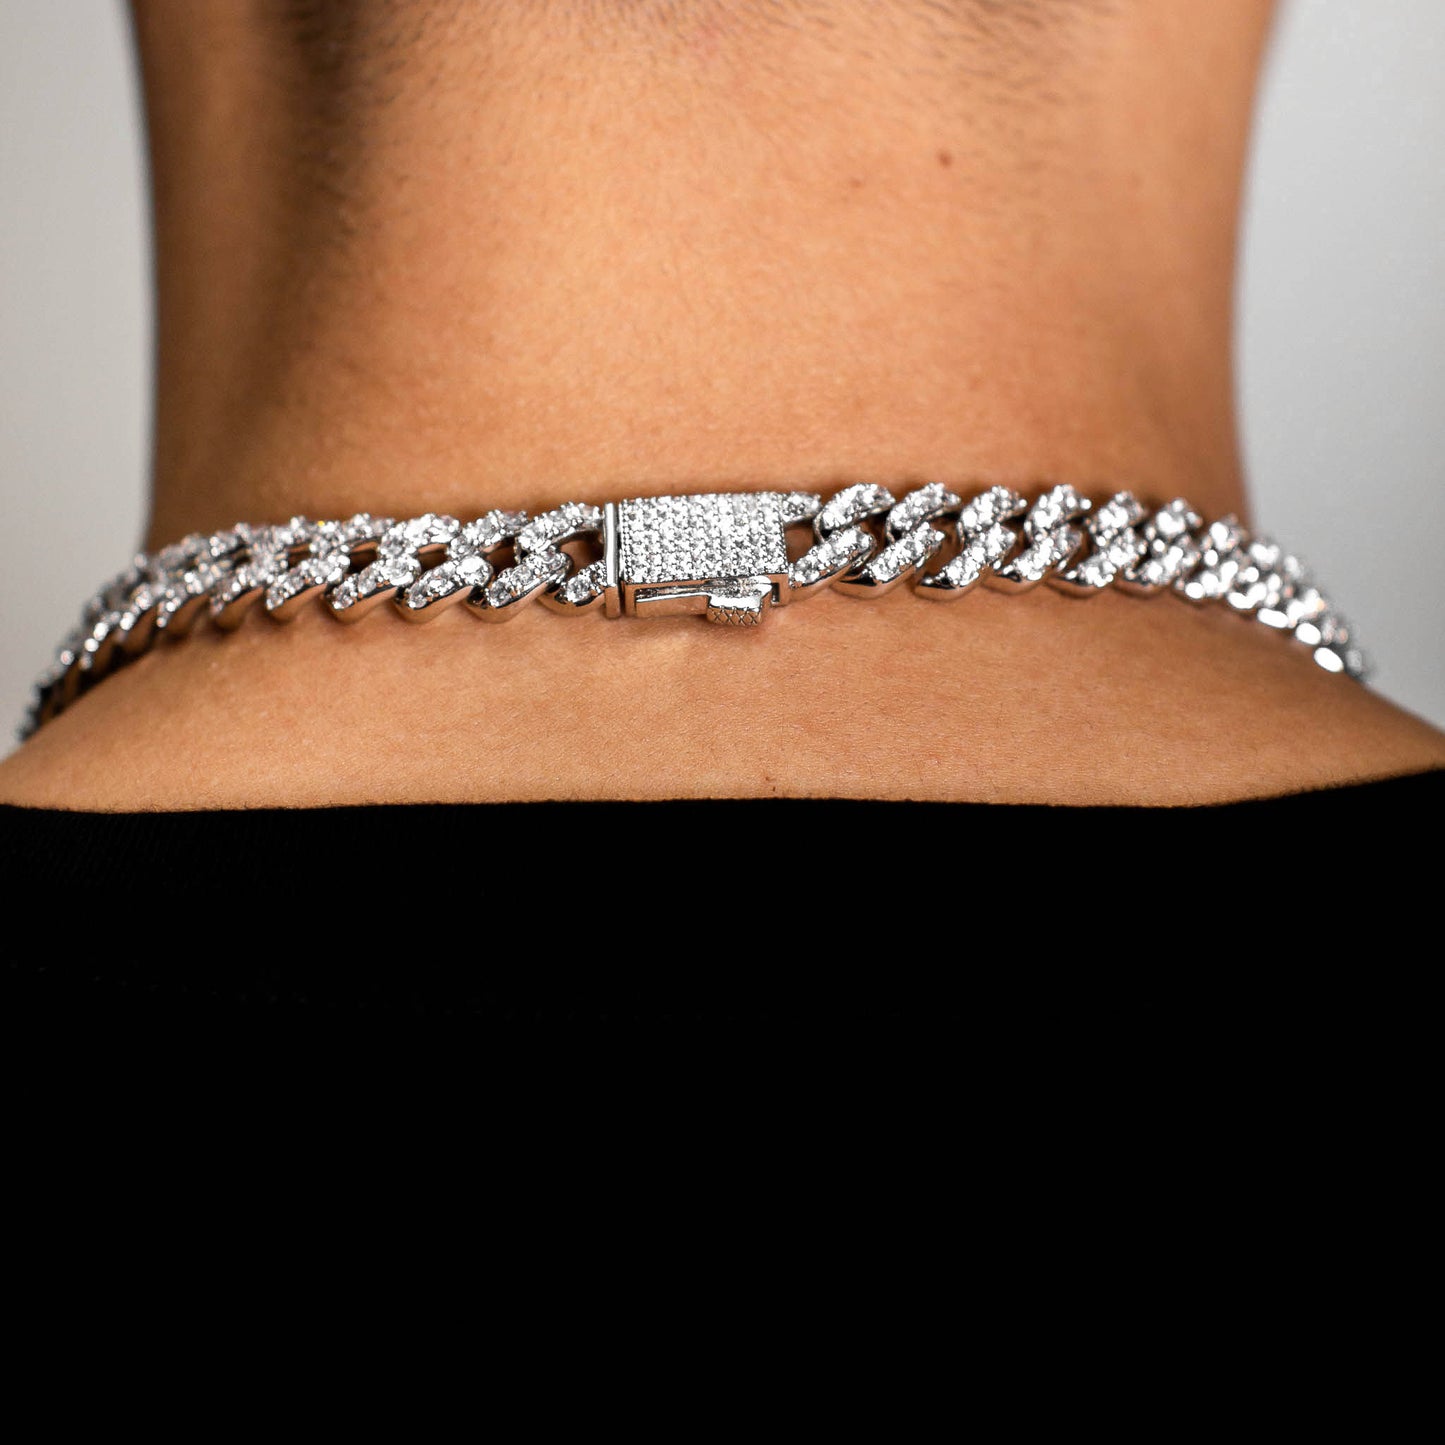 10mm Iced Cuban Link Chain - White Gold